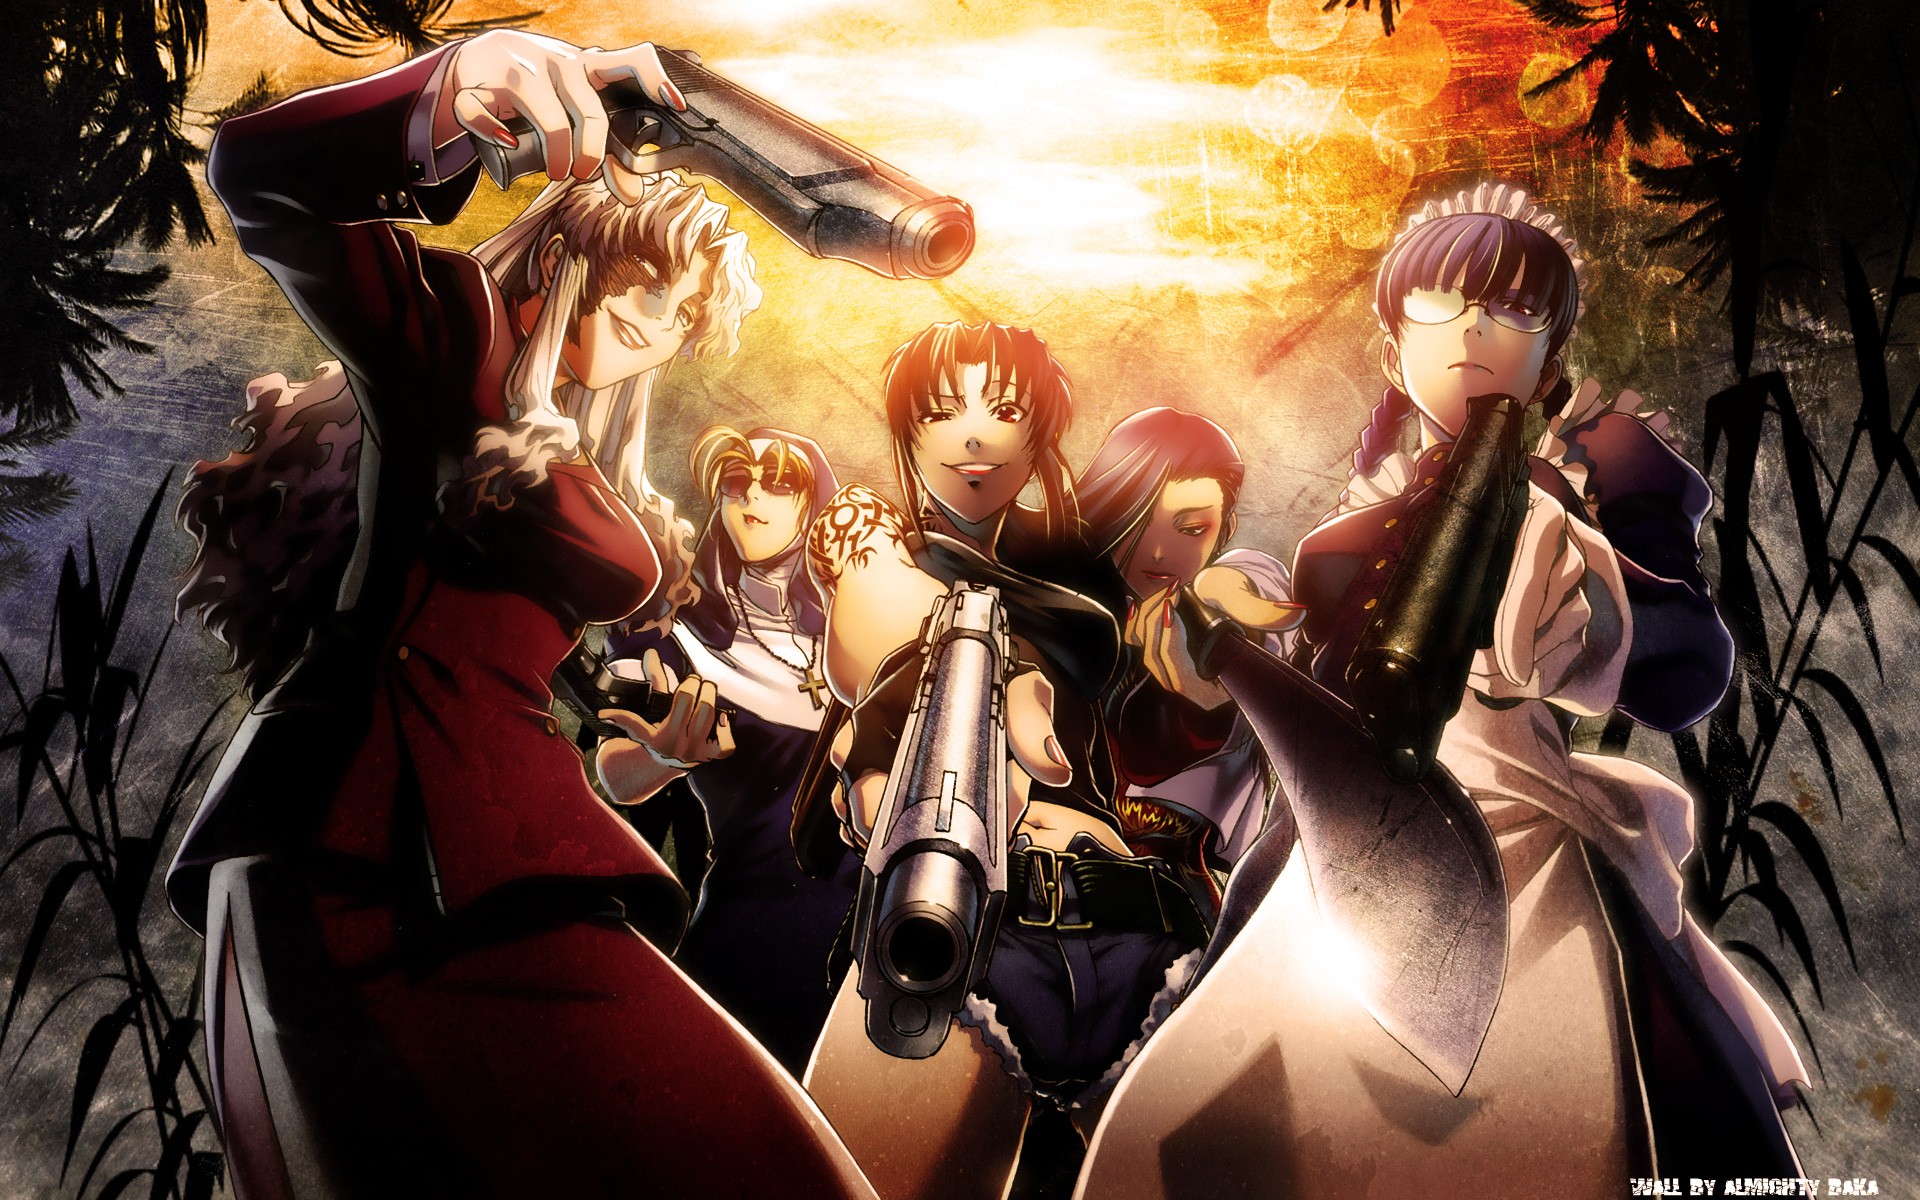 Download Wallpaper For 1920x1080 Resolution Black Lagoon Revy 